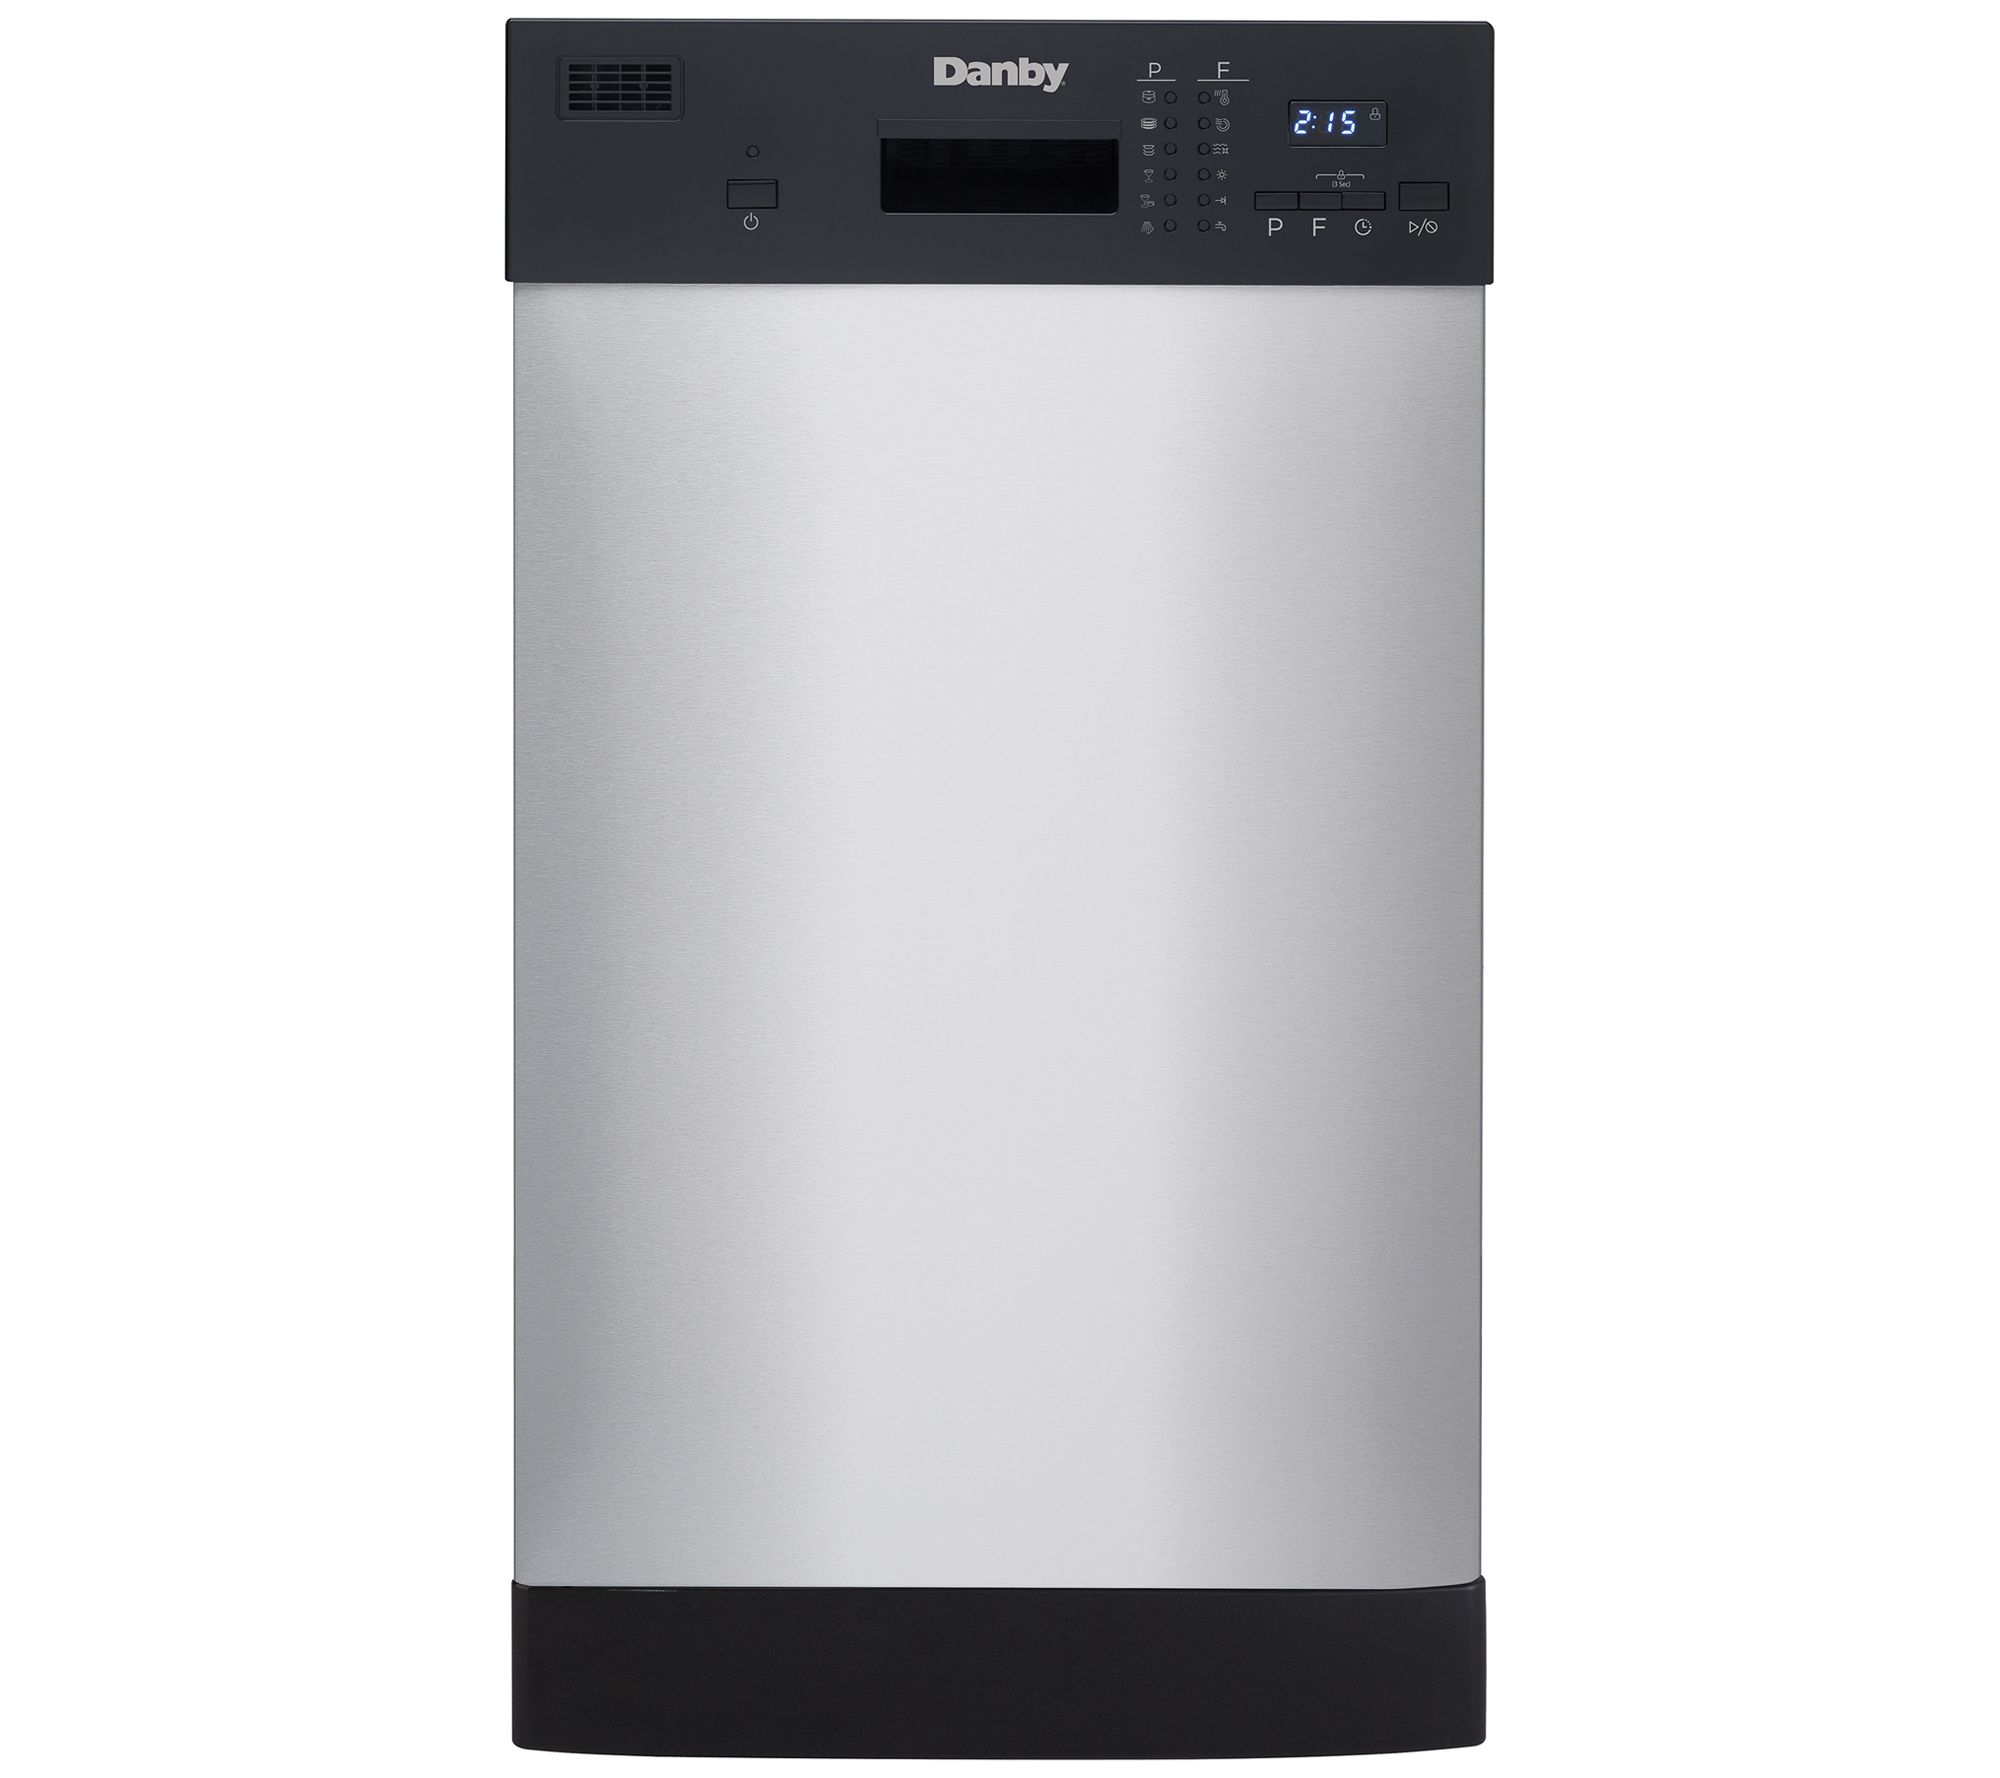 Danby 18 Wide Built-in Dishwasher in White